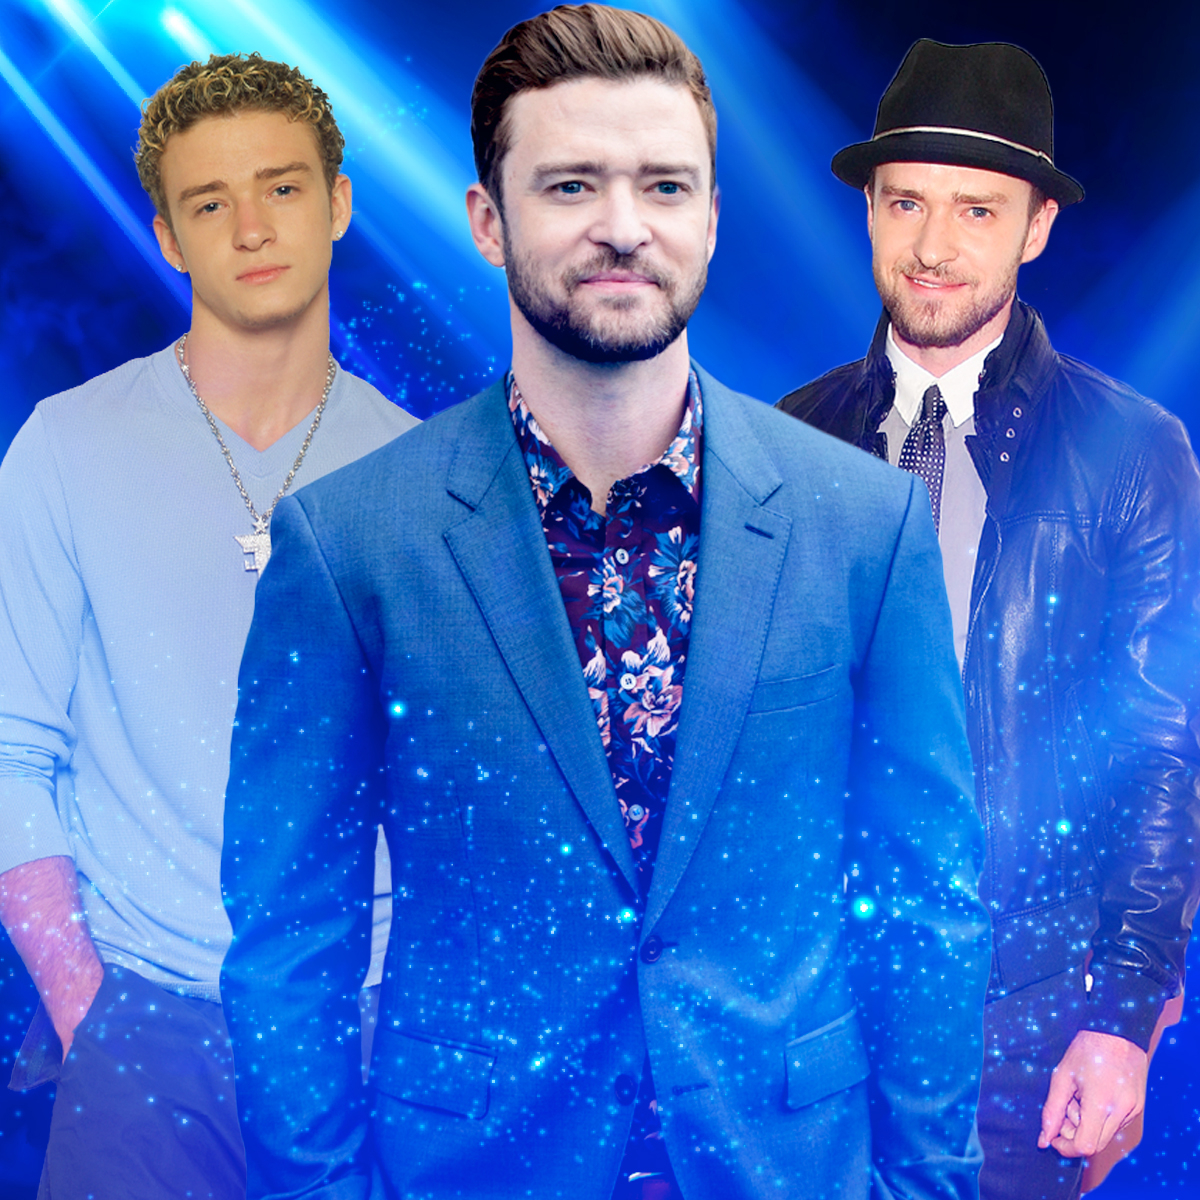 Justin Timberlake Hilariously Apologizes After Fans Mock His